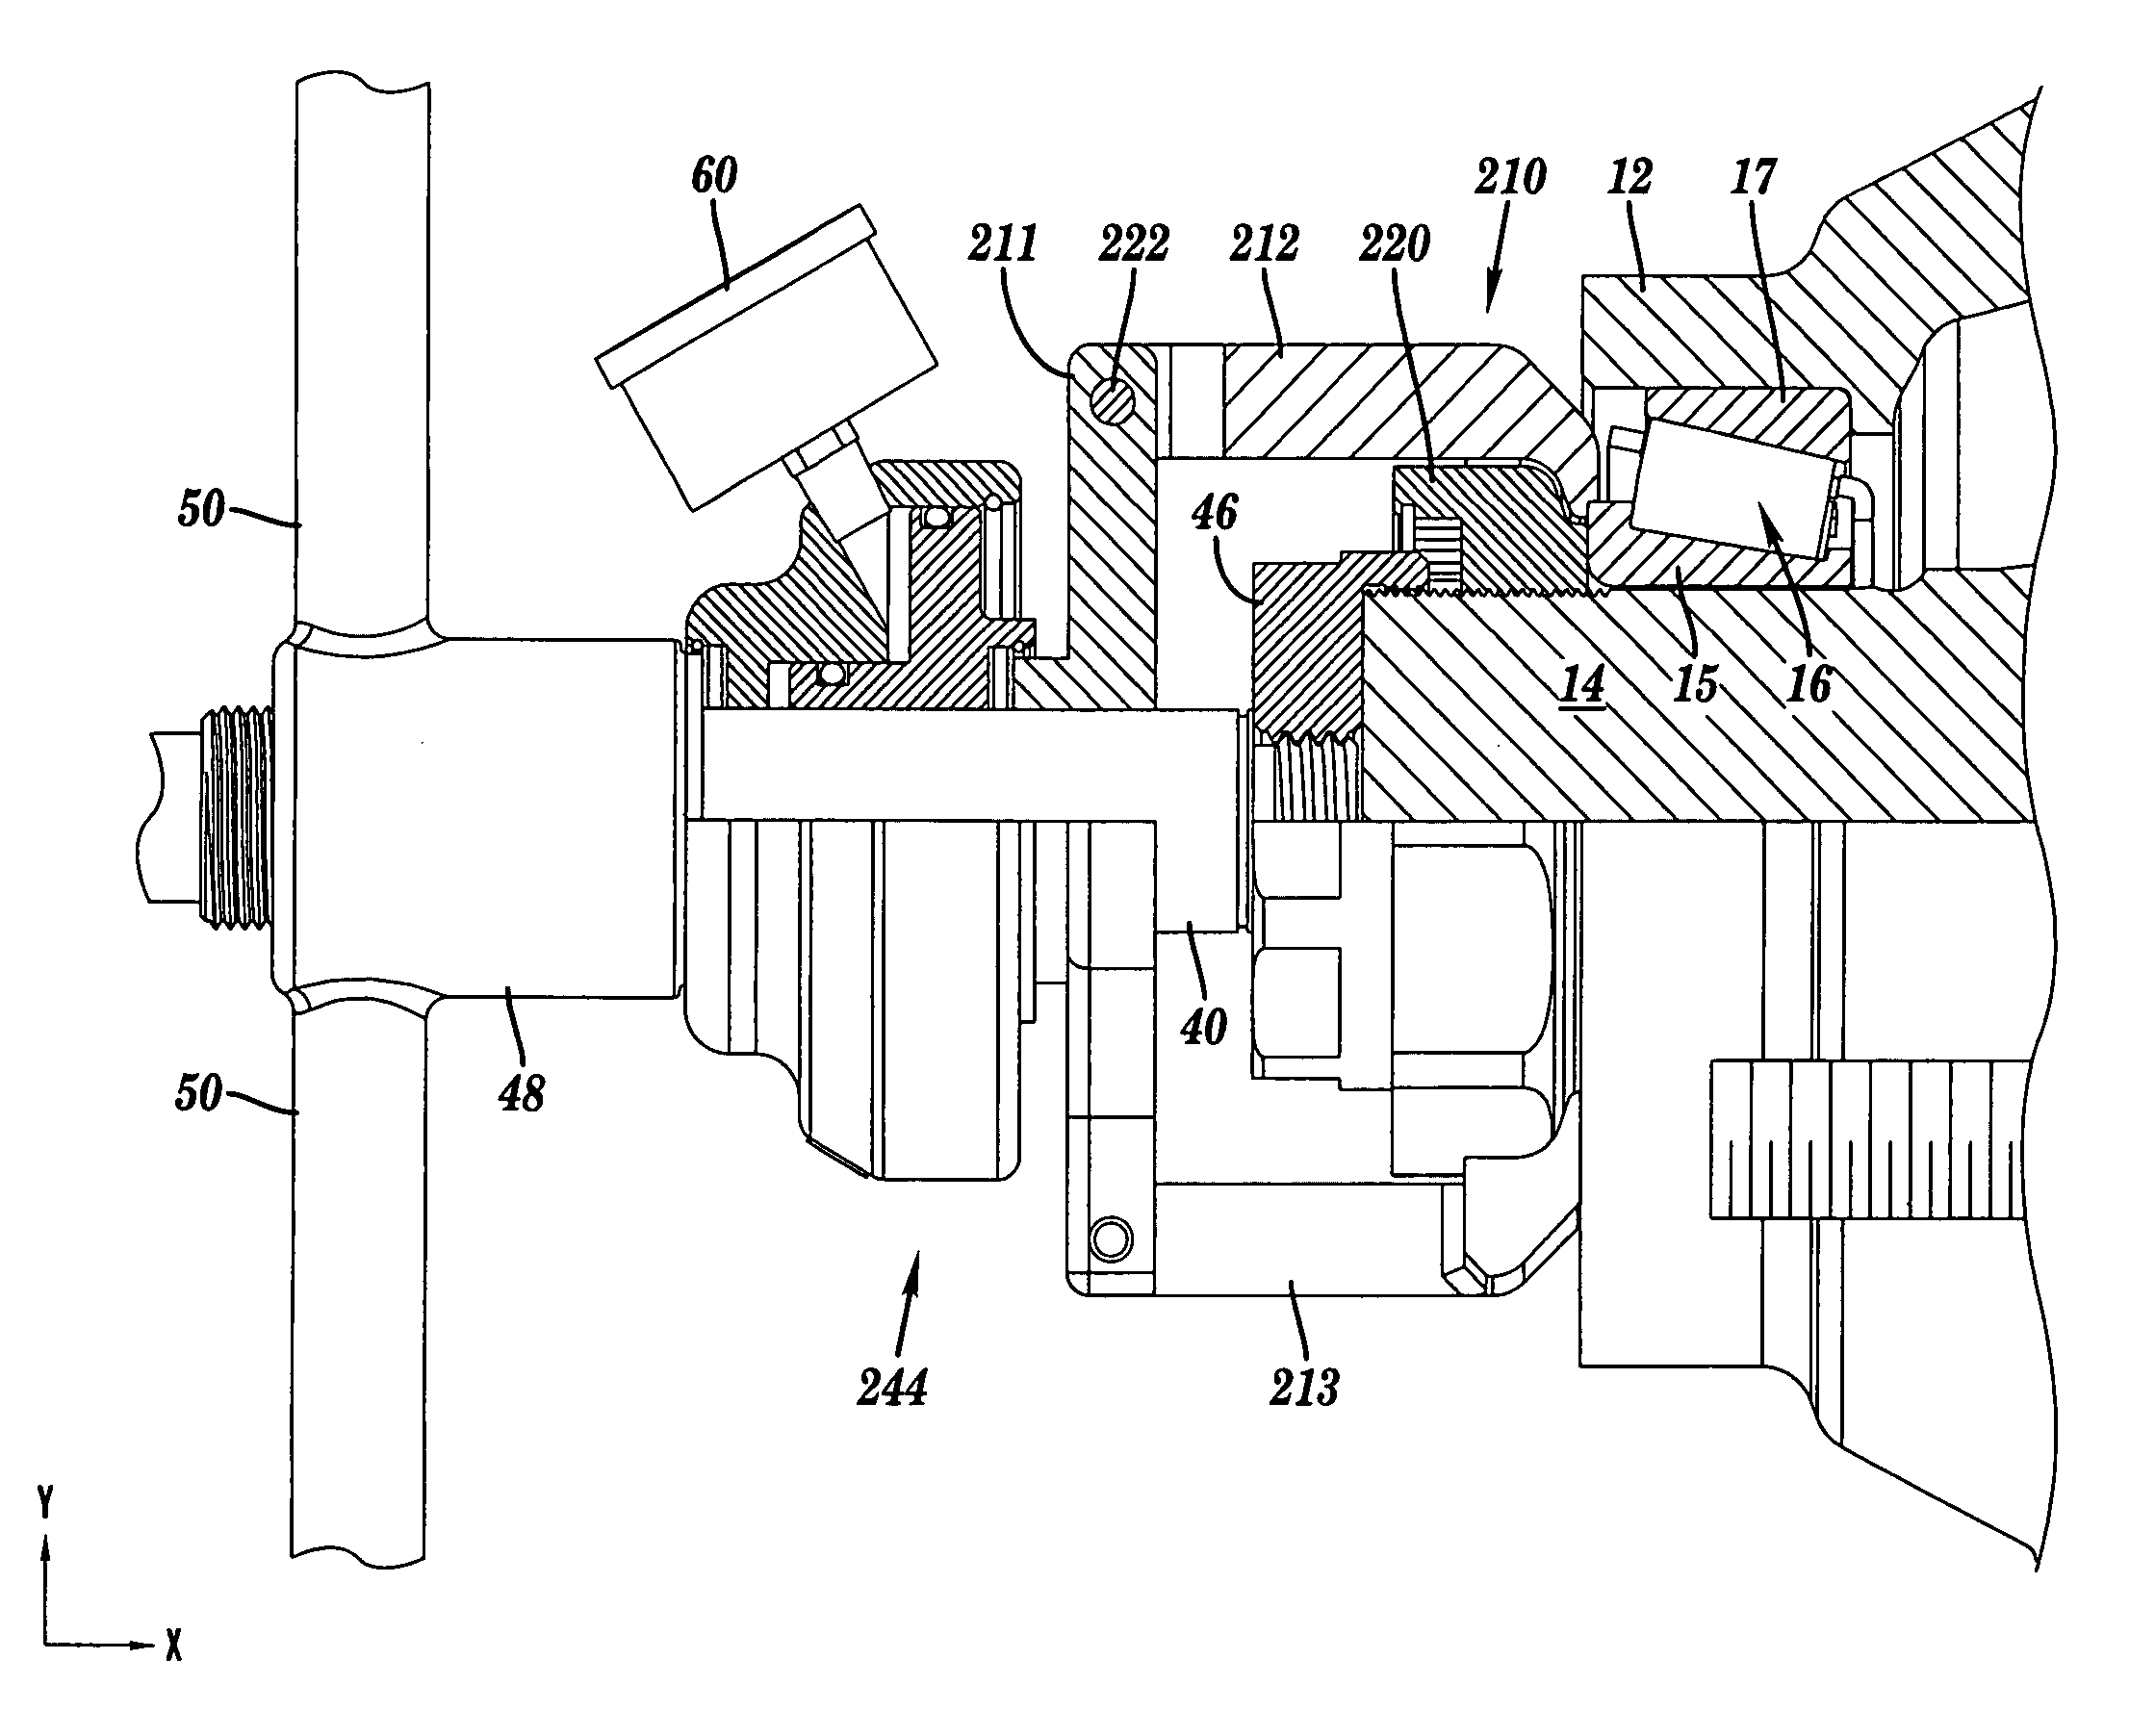 Apparatus for providing a load on a bearing, the bearing having an inner race mounted to a shaft and the bearing retained by a nut